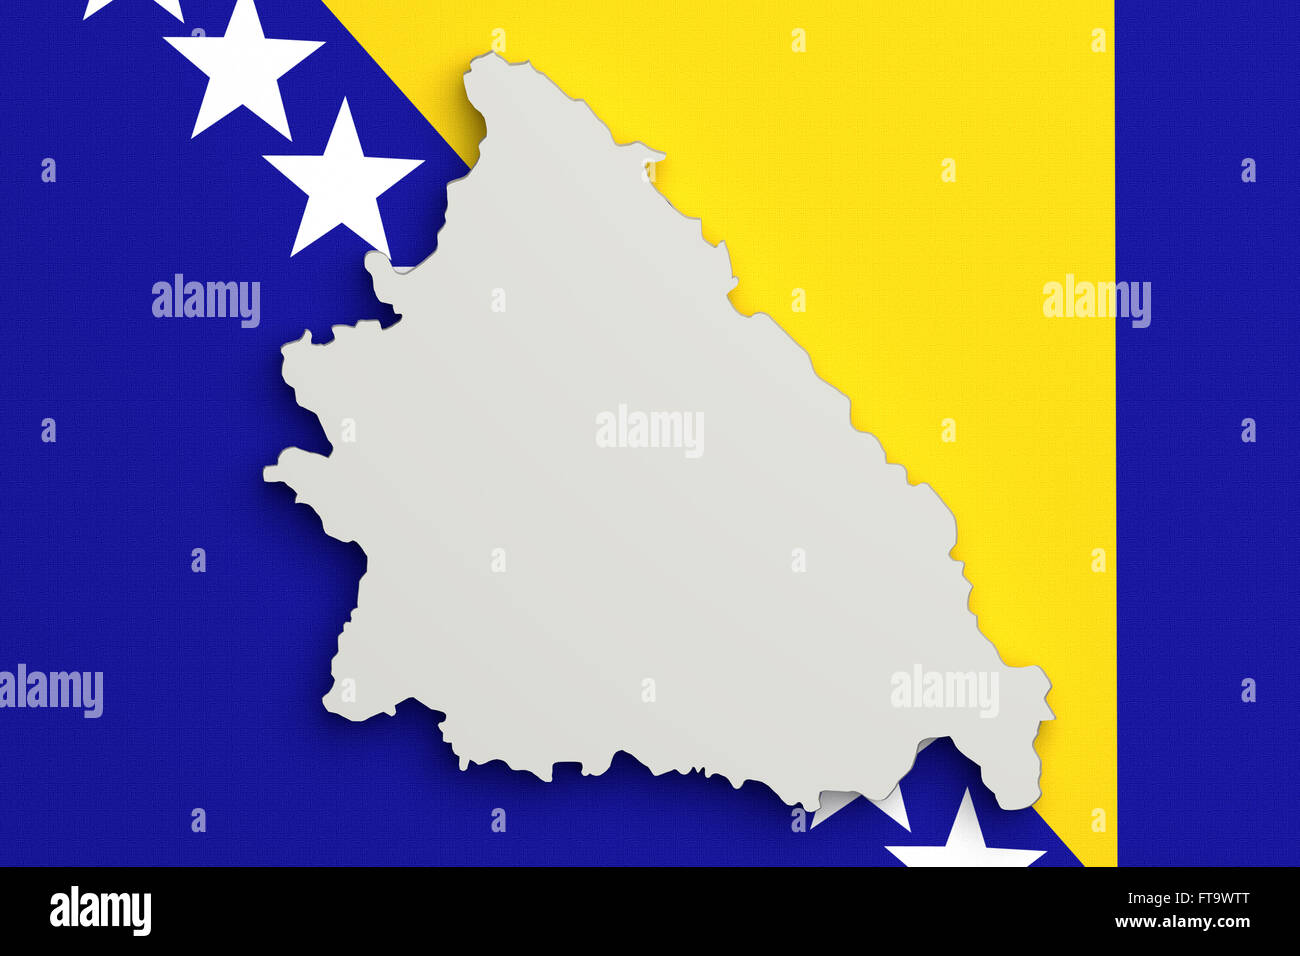 3d rendering of Bosnia and Herzegovina  map and flag on background. Stock Photo